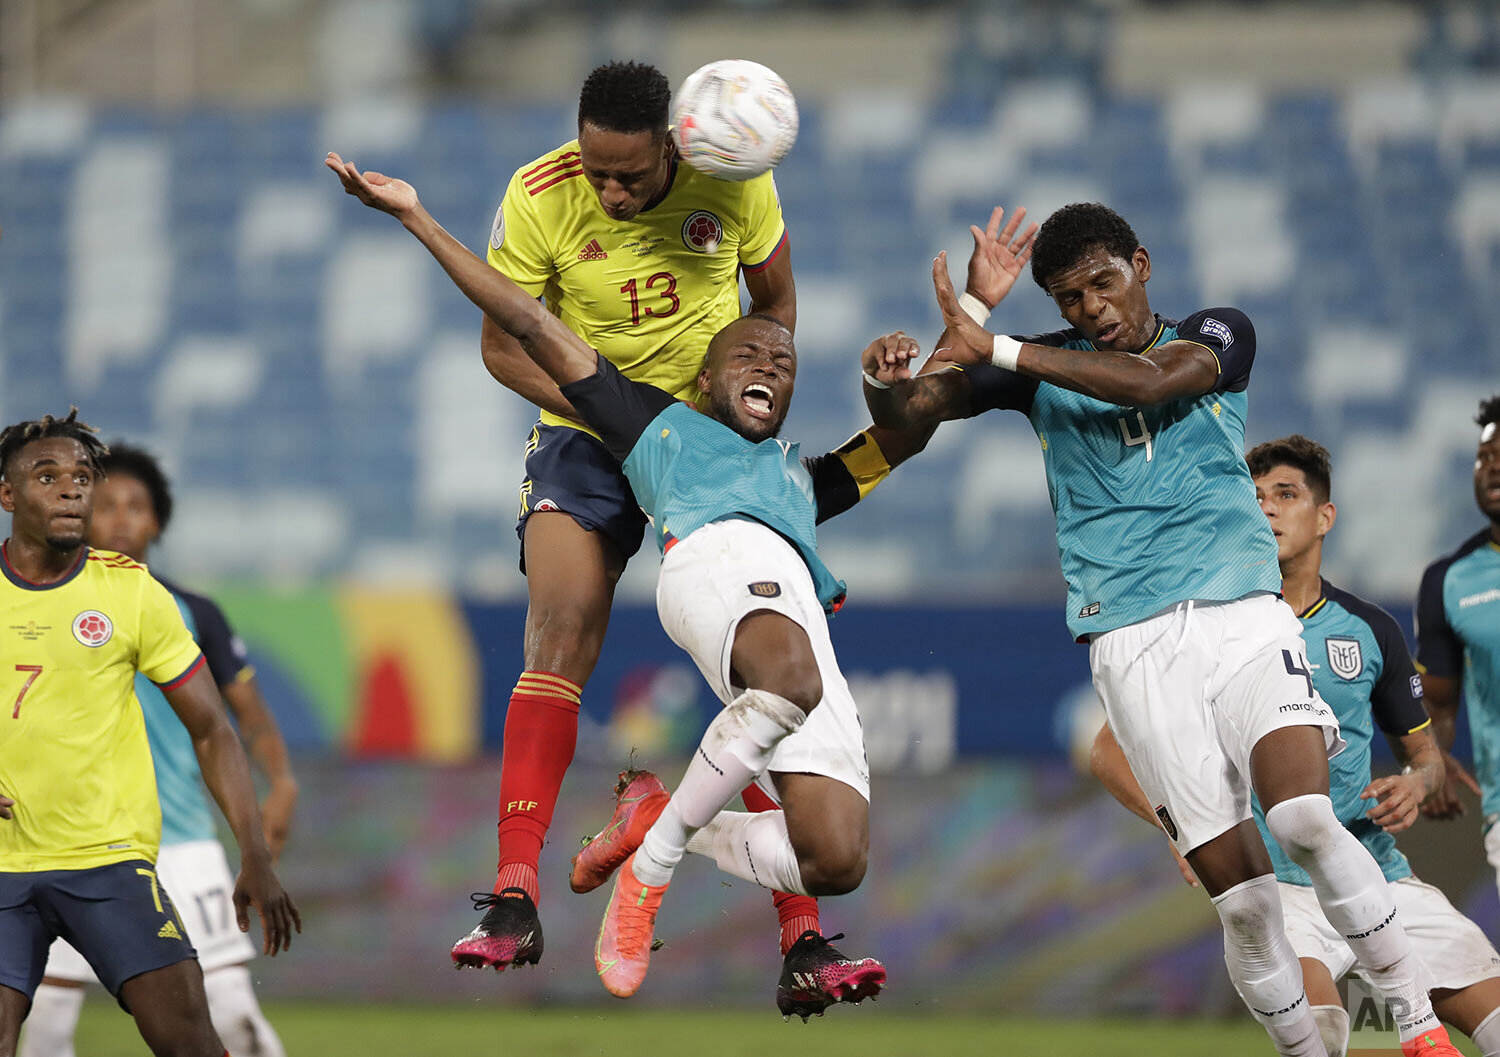  Colombia's Yerry Mina, top, Ecuador's Enner Valencia, center, and Ecuador's Robert Arboleda head for the ball during a Copa America soccer match at Arena Pantanal stadium in Cuiaba, Brazil, Sunday, June 13, 2021. (AP Photo/Andre Penner) 